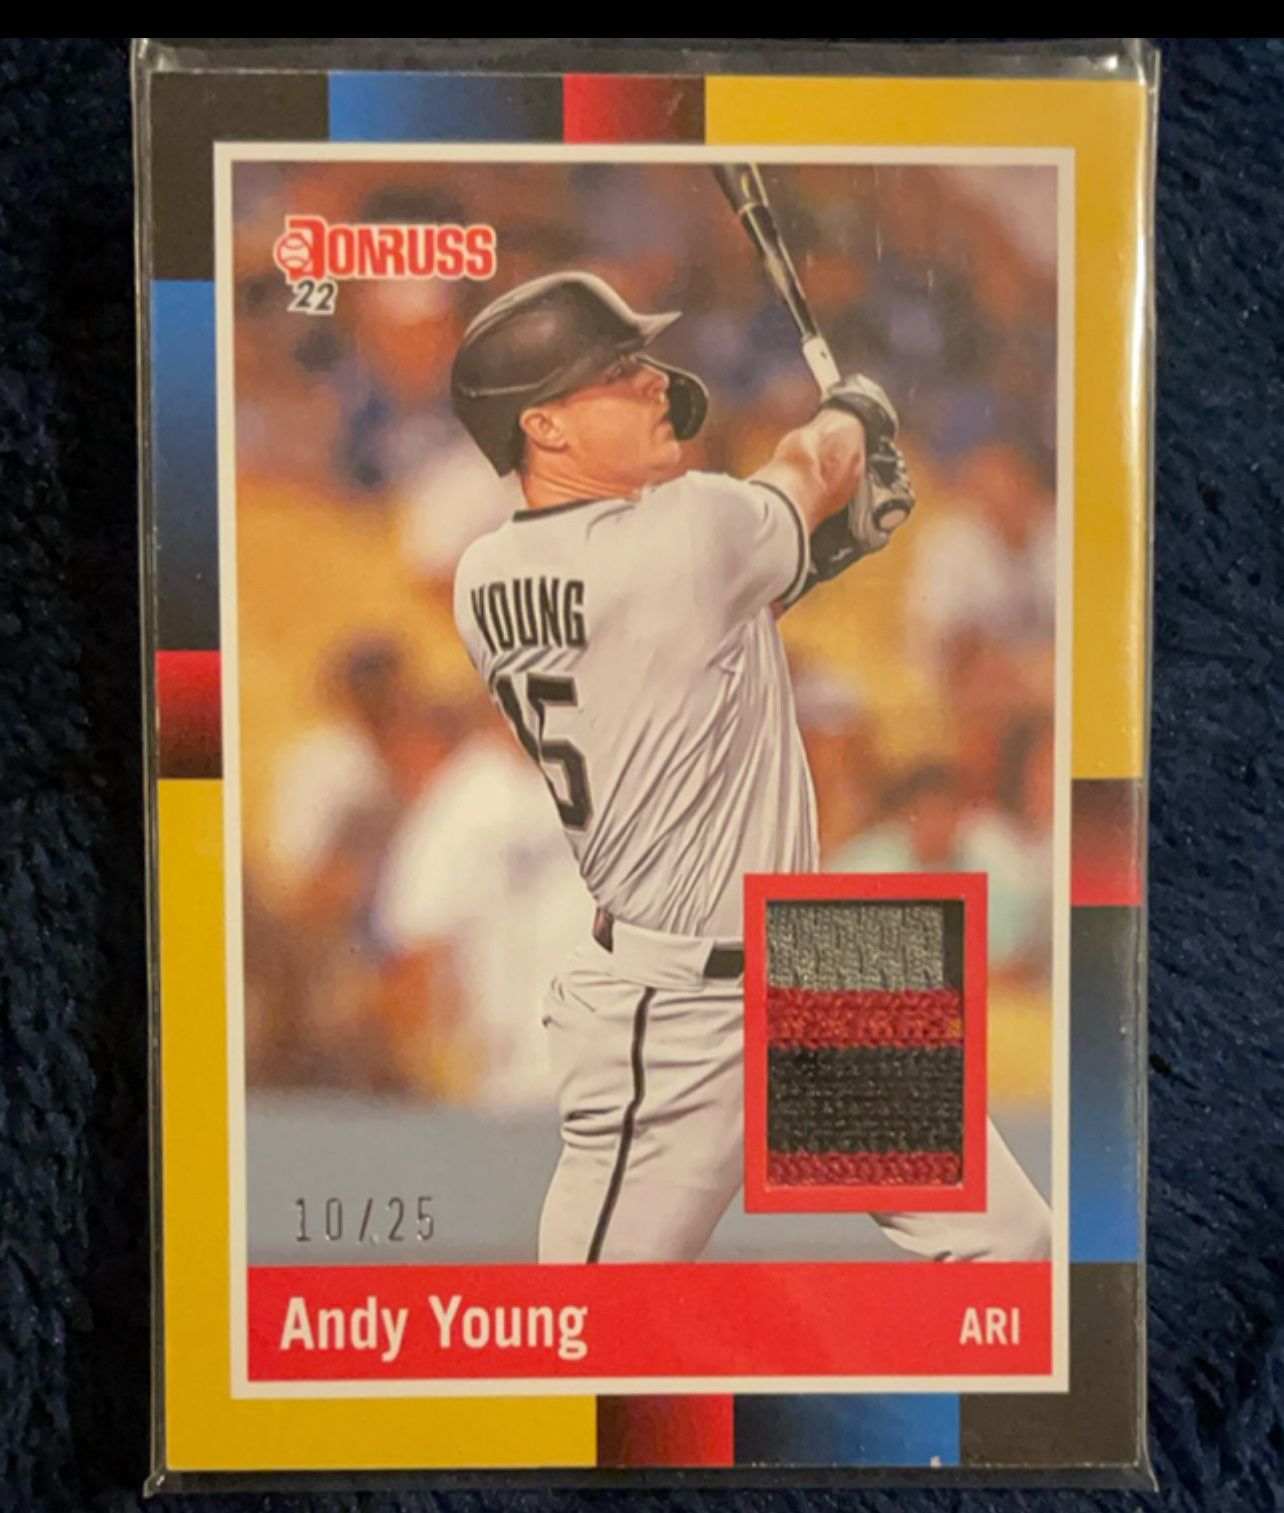 2022 Donruss Andy Young 3 Color Patch 10/25 #R88M-AY NM